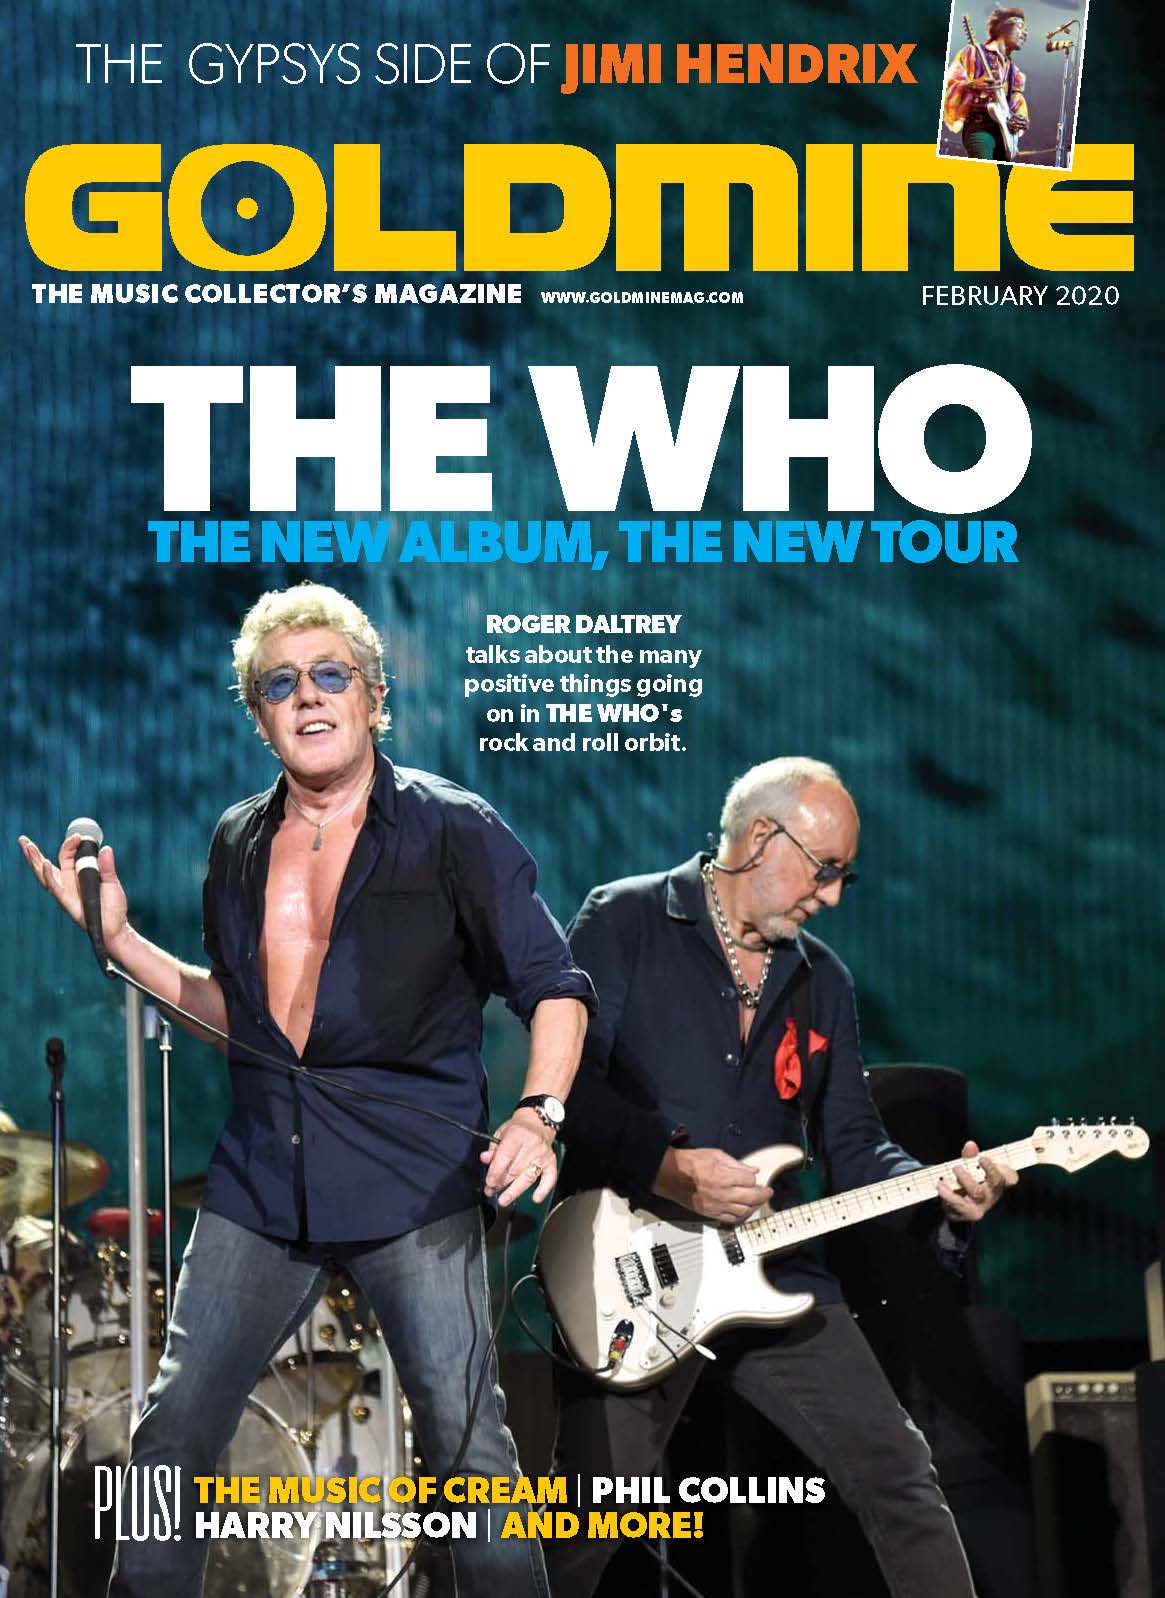 GOLDMINE MAGAZINE: FEBRUARY 2020 ISSUE FEATURING THE WHO